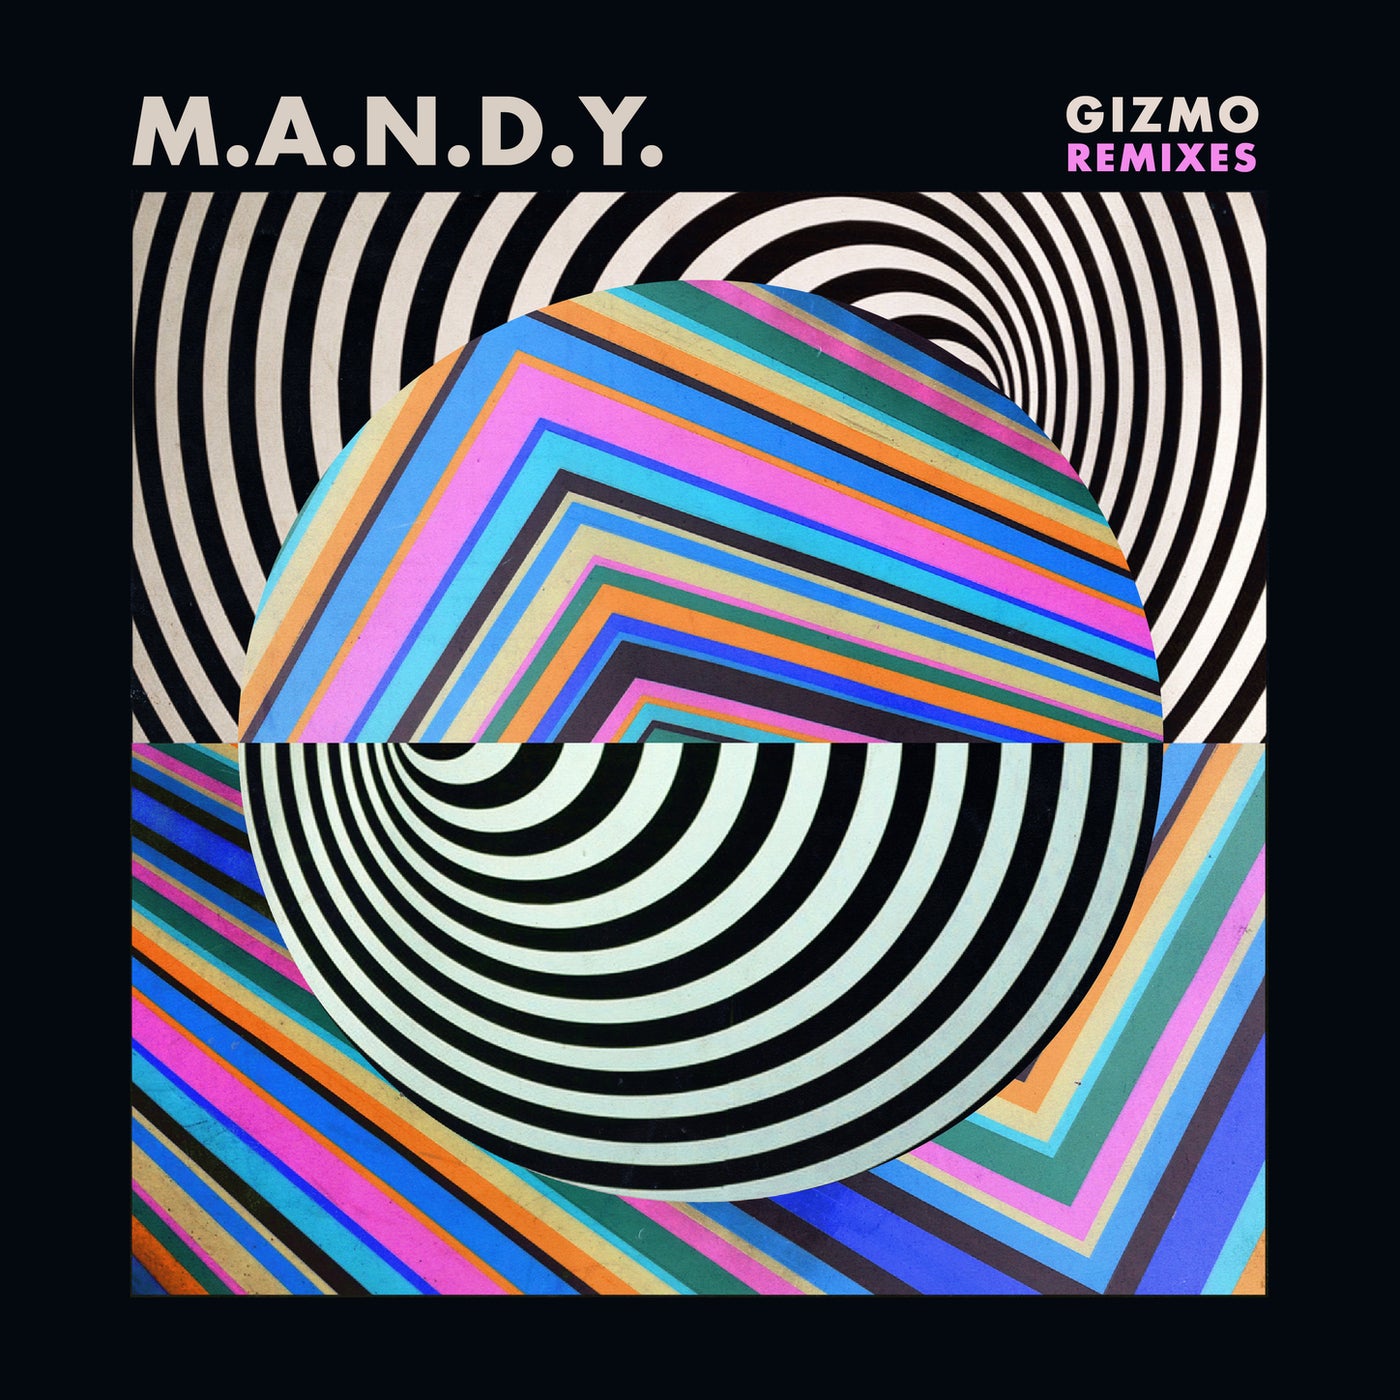 image cover: M.A.N.D.Y. - Gizmo (Remixes) / GPM637